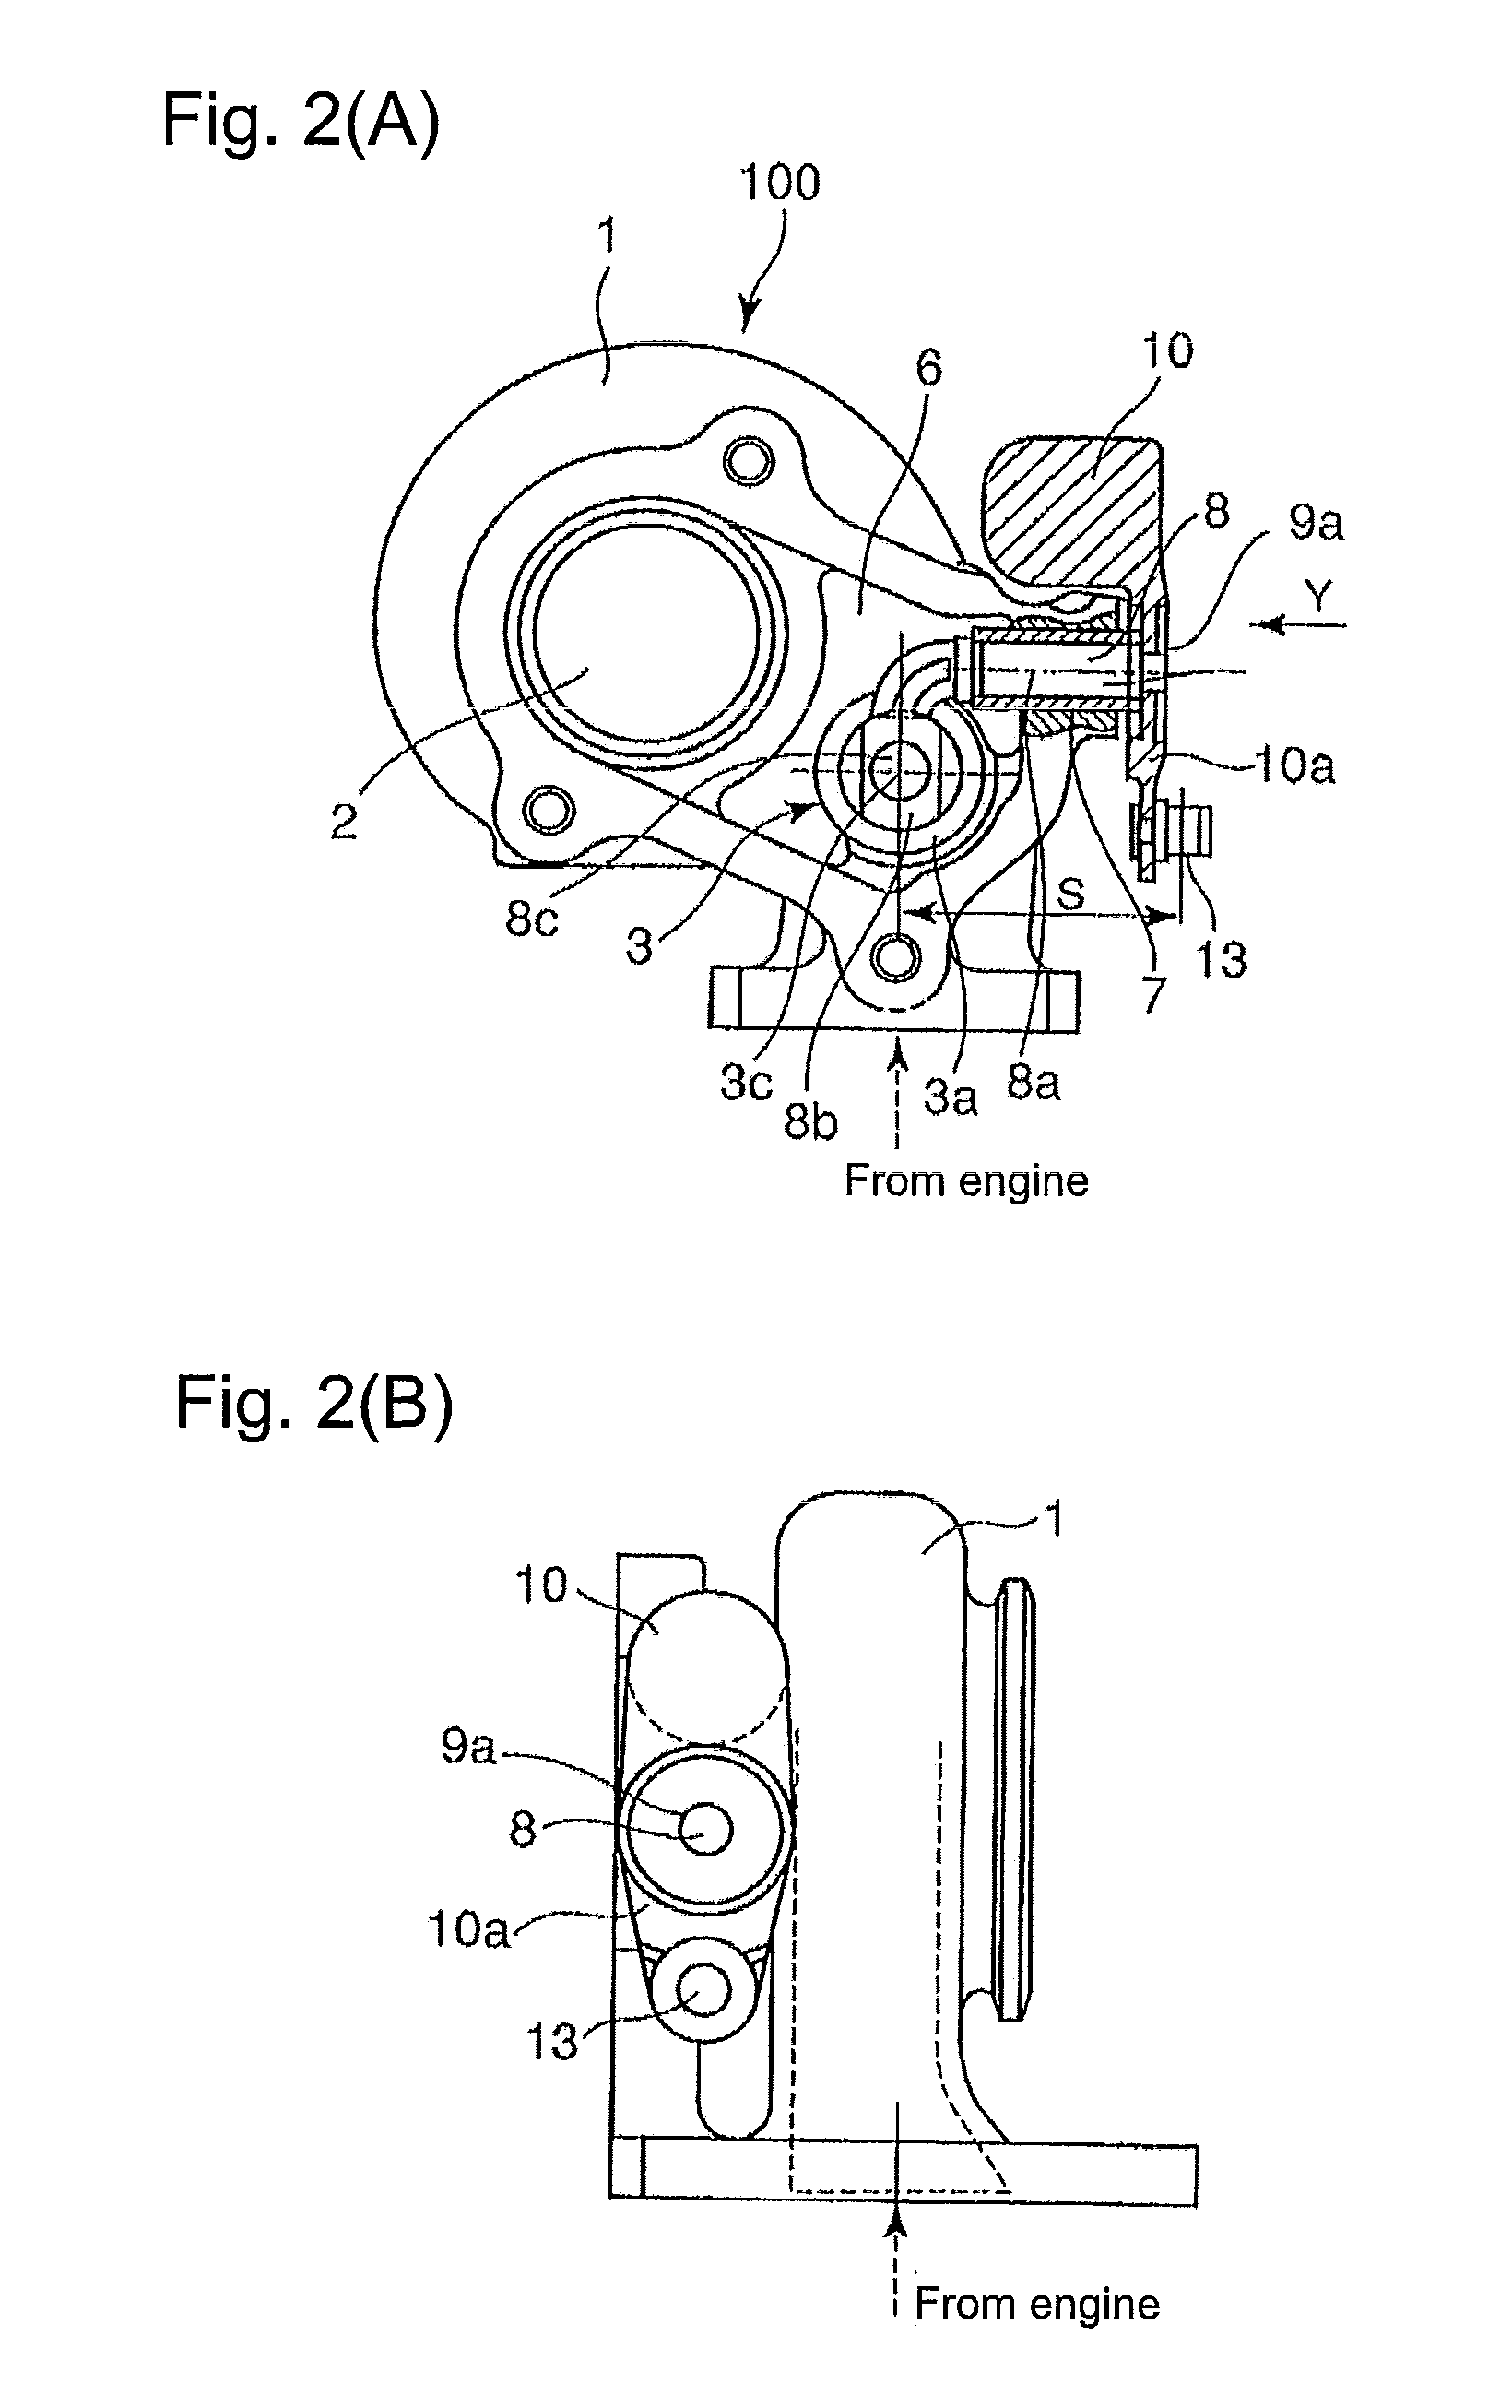 Exhaust turbine equipped with exhaust control valve